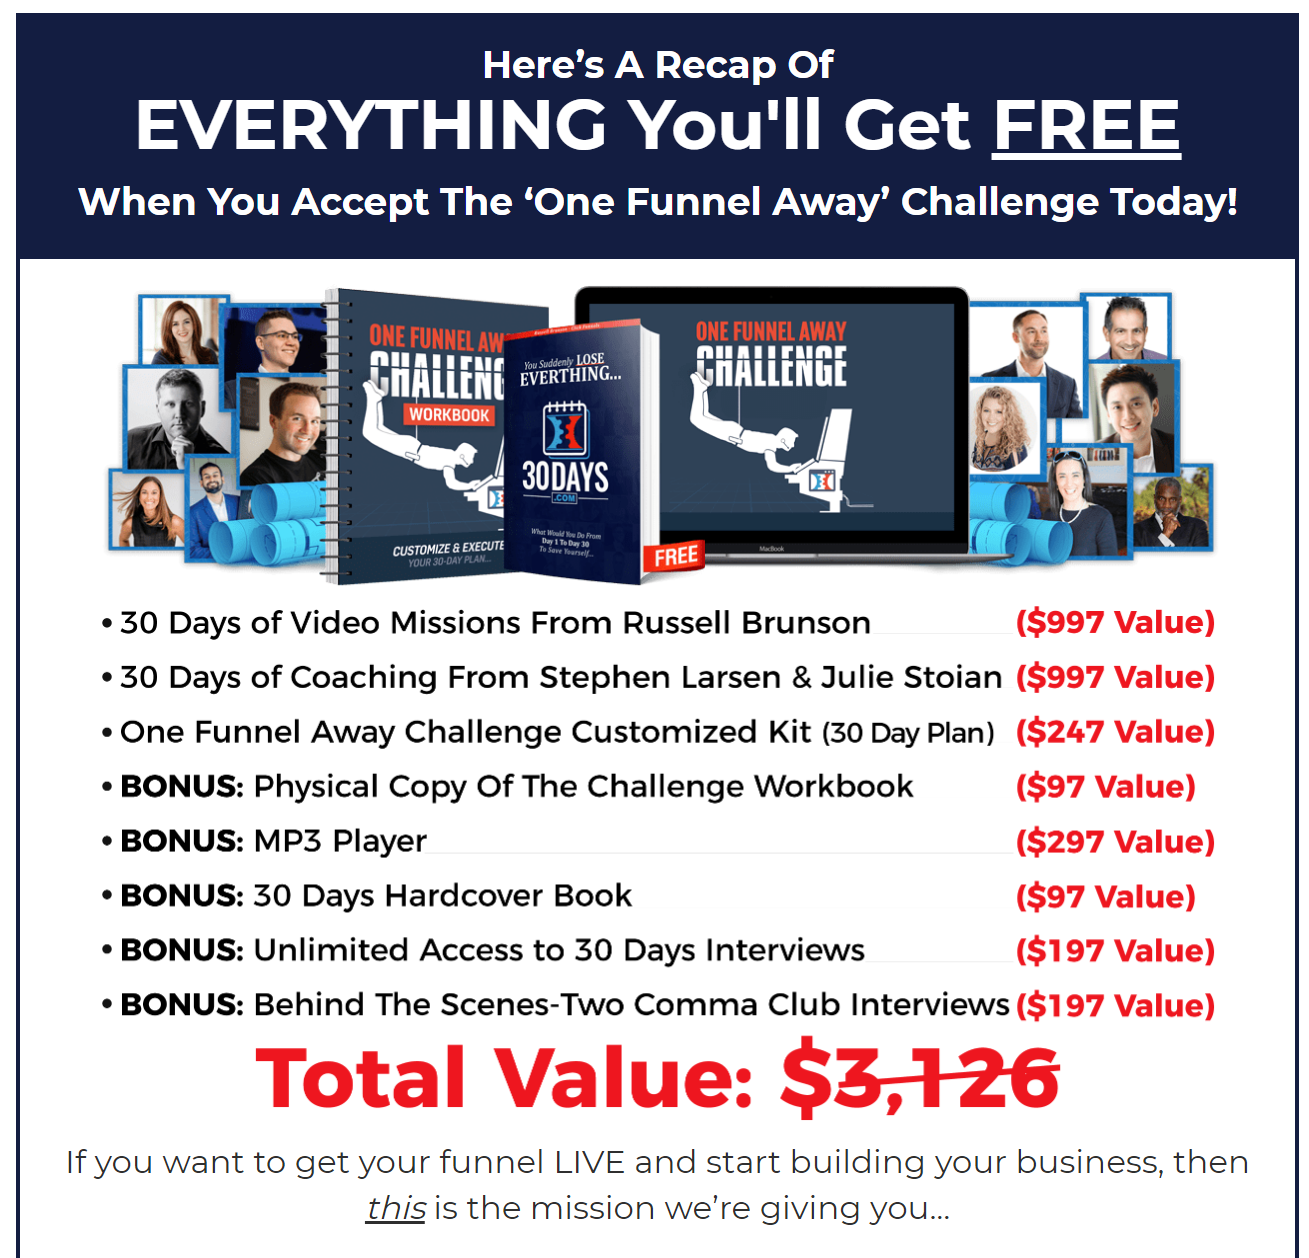 One Funnel Away Challenge - Become Funnel Experts